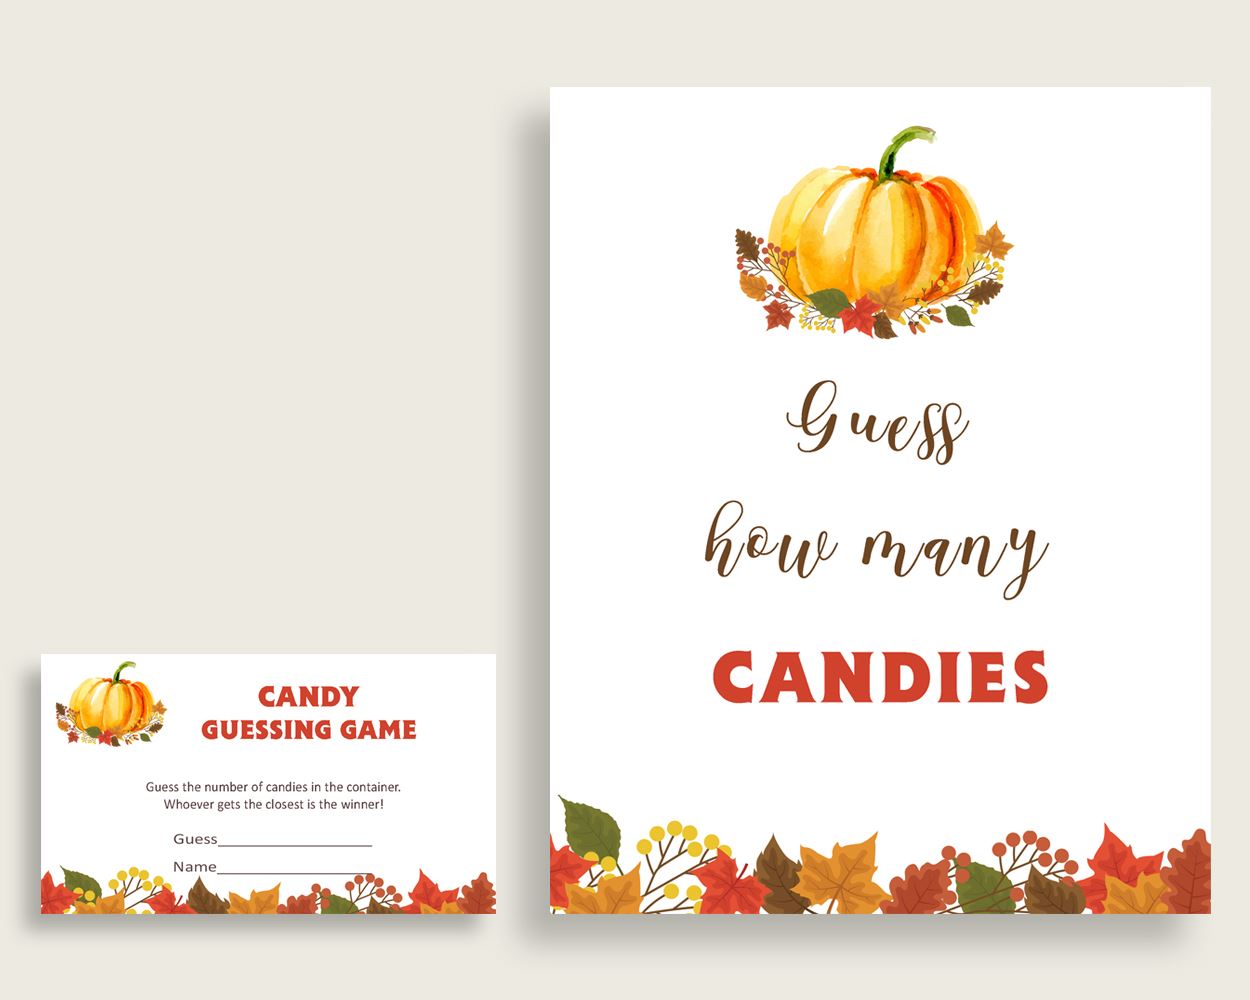 Candy Guessing Baby Shower Candy Guessing Fall Baby Shower Candy Guessing Baby Shower Pumpkin Candy Guessing Orange Brown prints party BPK3D - Digital Product